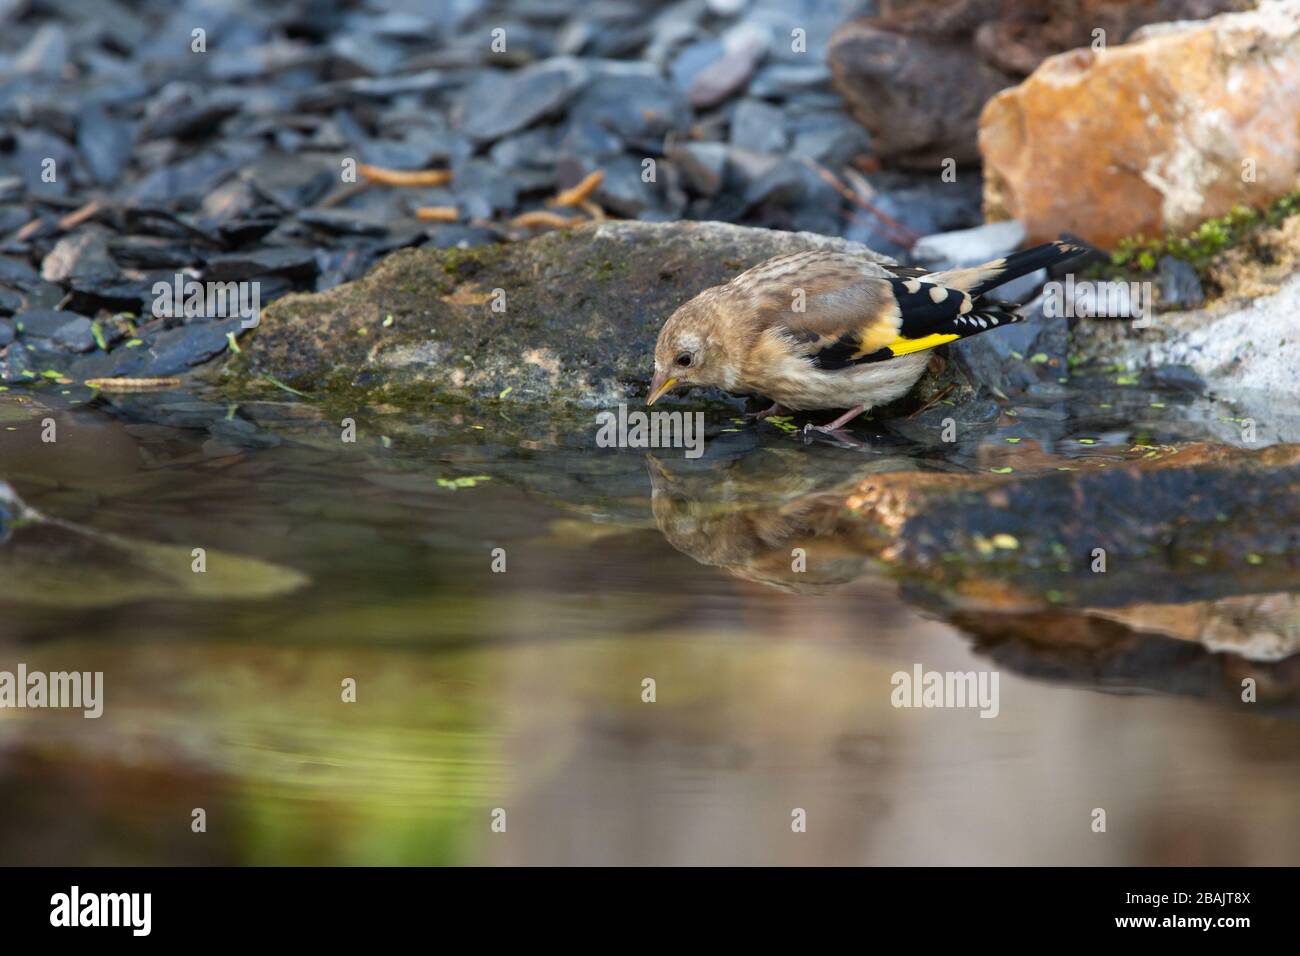 Juvenile Goldfinch [ Carduelis carduelis ] drinking at garden pond with reflection Stock Photo